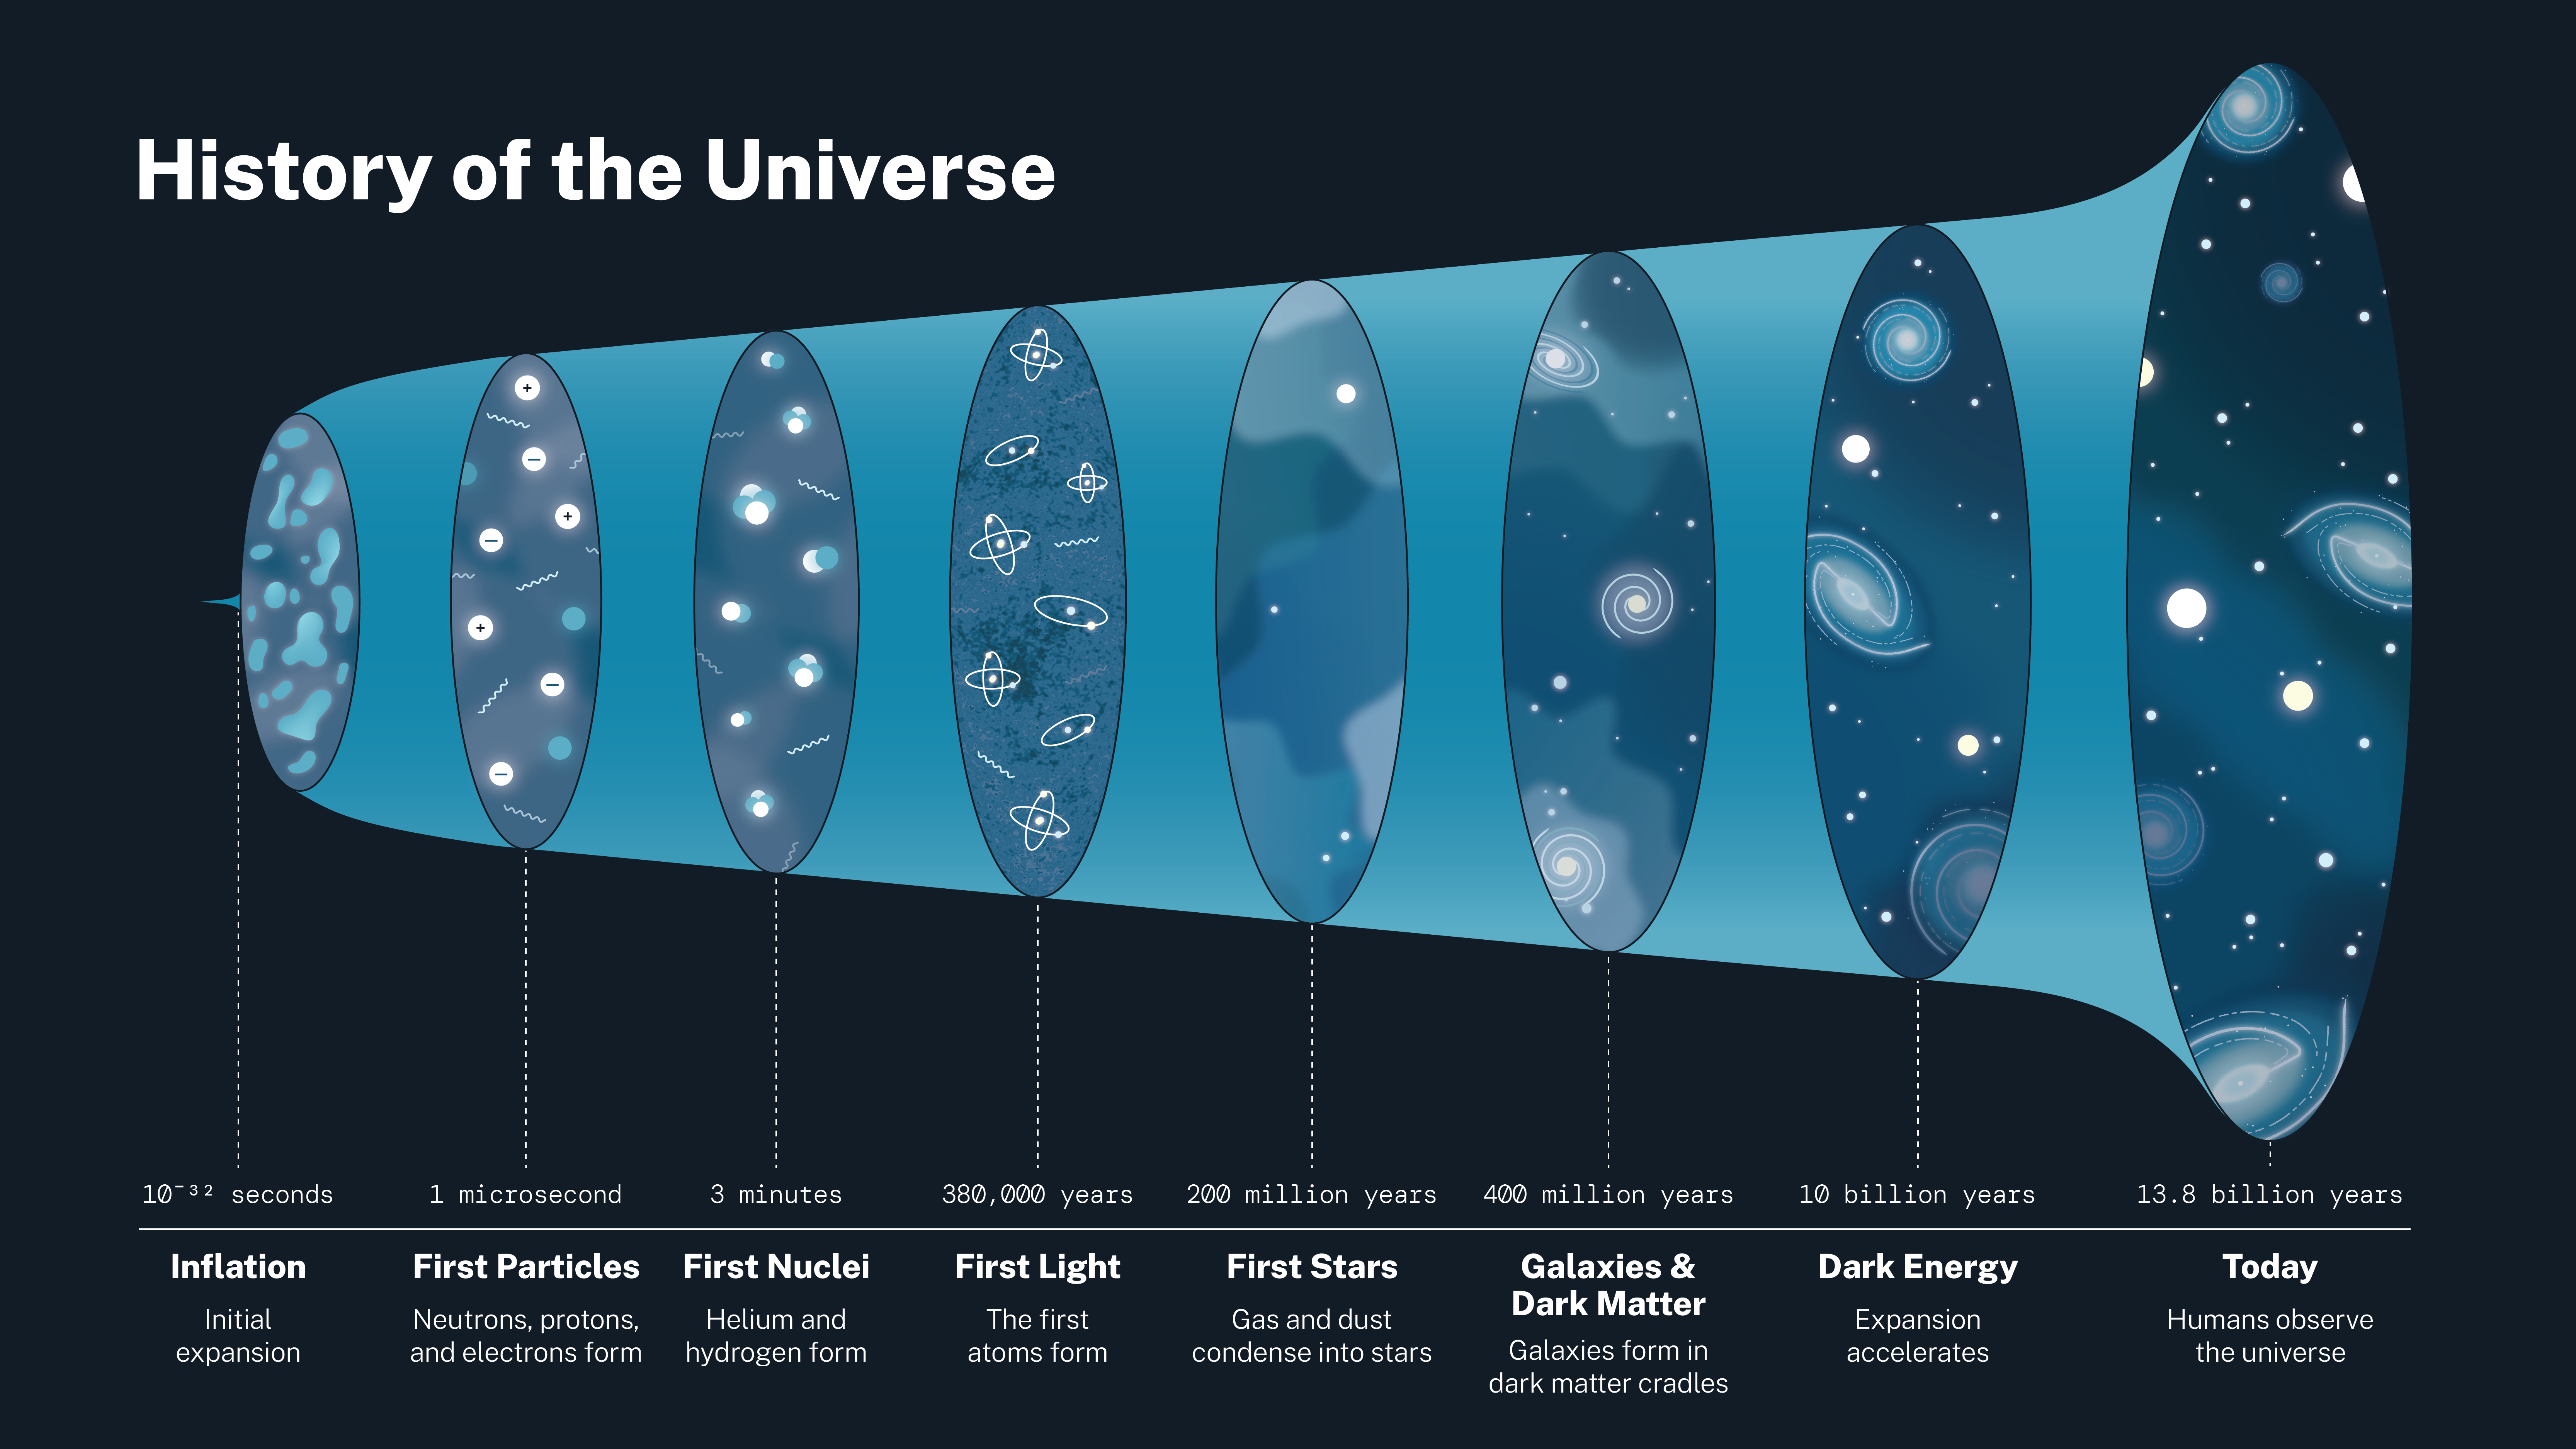 This infographic is done in shades of blue and white. At the top left is the title: “History of the Universe.” Below that is a cone with graphics representing different stages of cosmic history within eight evenly spaced ovals. Below the cone is text connected to each oval indicating time since the beginning of the universe, the name of the cosmic era, and a brief description. The first oval on the left is filled with blobs, and the associated text reads: 10 to the negative 32 seconds, Inflation, and Initial expansion. Moving right, the next oval is filled with light (represented as squiggles), protons, and neutrons. The text below reads: one microsecond; first particles; and neutrons, protons, and electrons form. The next oval is filled with light (squiggles) and atomic nuclei. The text below reads: three minutes; first nuclei; and helium and hydrogen form. The next oval is filled with light (squiggles) and atoms. The text below reads: 380,000 years; first light; and the first atoms form. The next oval is filled with transparent areas of blue representing gas with a few dots representing stars. The text below reads: 200 million years; first stars; and gas and dust condense into stars. The next oval is filled with tightly packed galaxies with some transparent areas representing gas. The text below reads: 400 million years; galaxies and dark matter; and galaxies form in dark matter cradles. The next oval is filled with galaxies that have moved apart with stars in between. The text below reads: 10 billion years; dark energy; and expansion accelerates. The last oval is filled with galaxies that have moved far apart with stars in between. The text below reads: 13.8 billion years; today; and humans observe the universe.